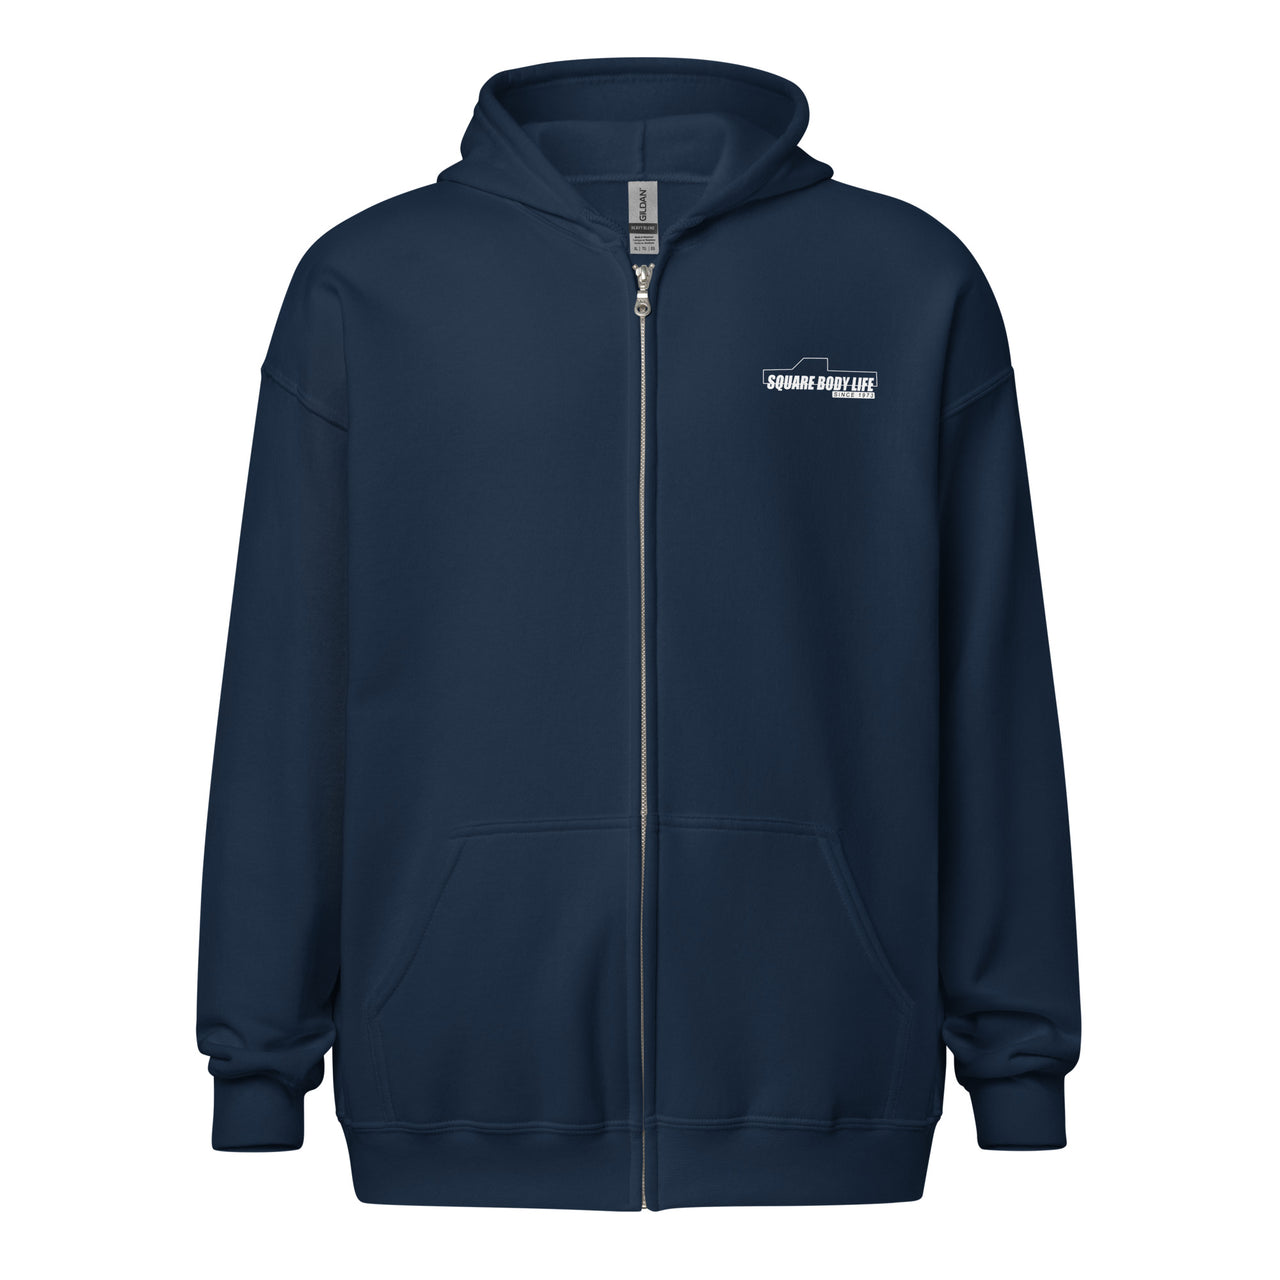 Square Body truck zip up hoodie in navy - front view